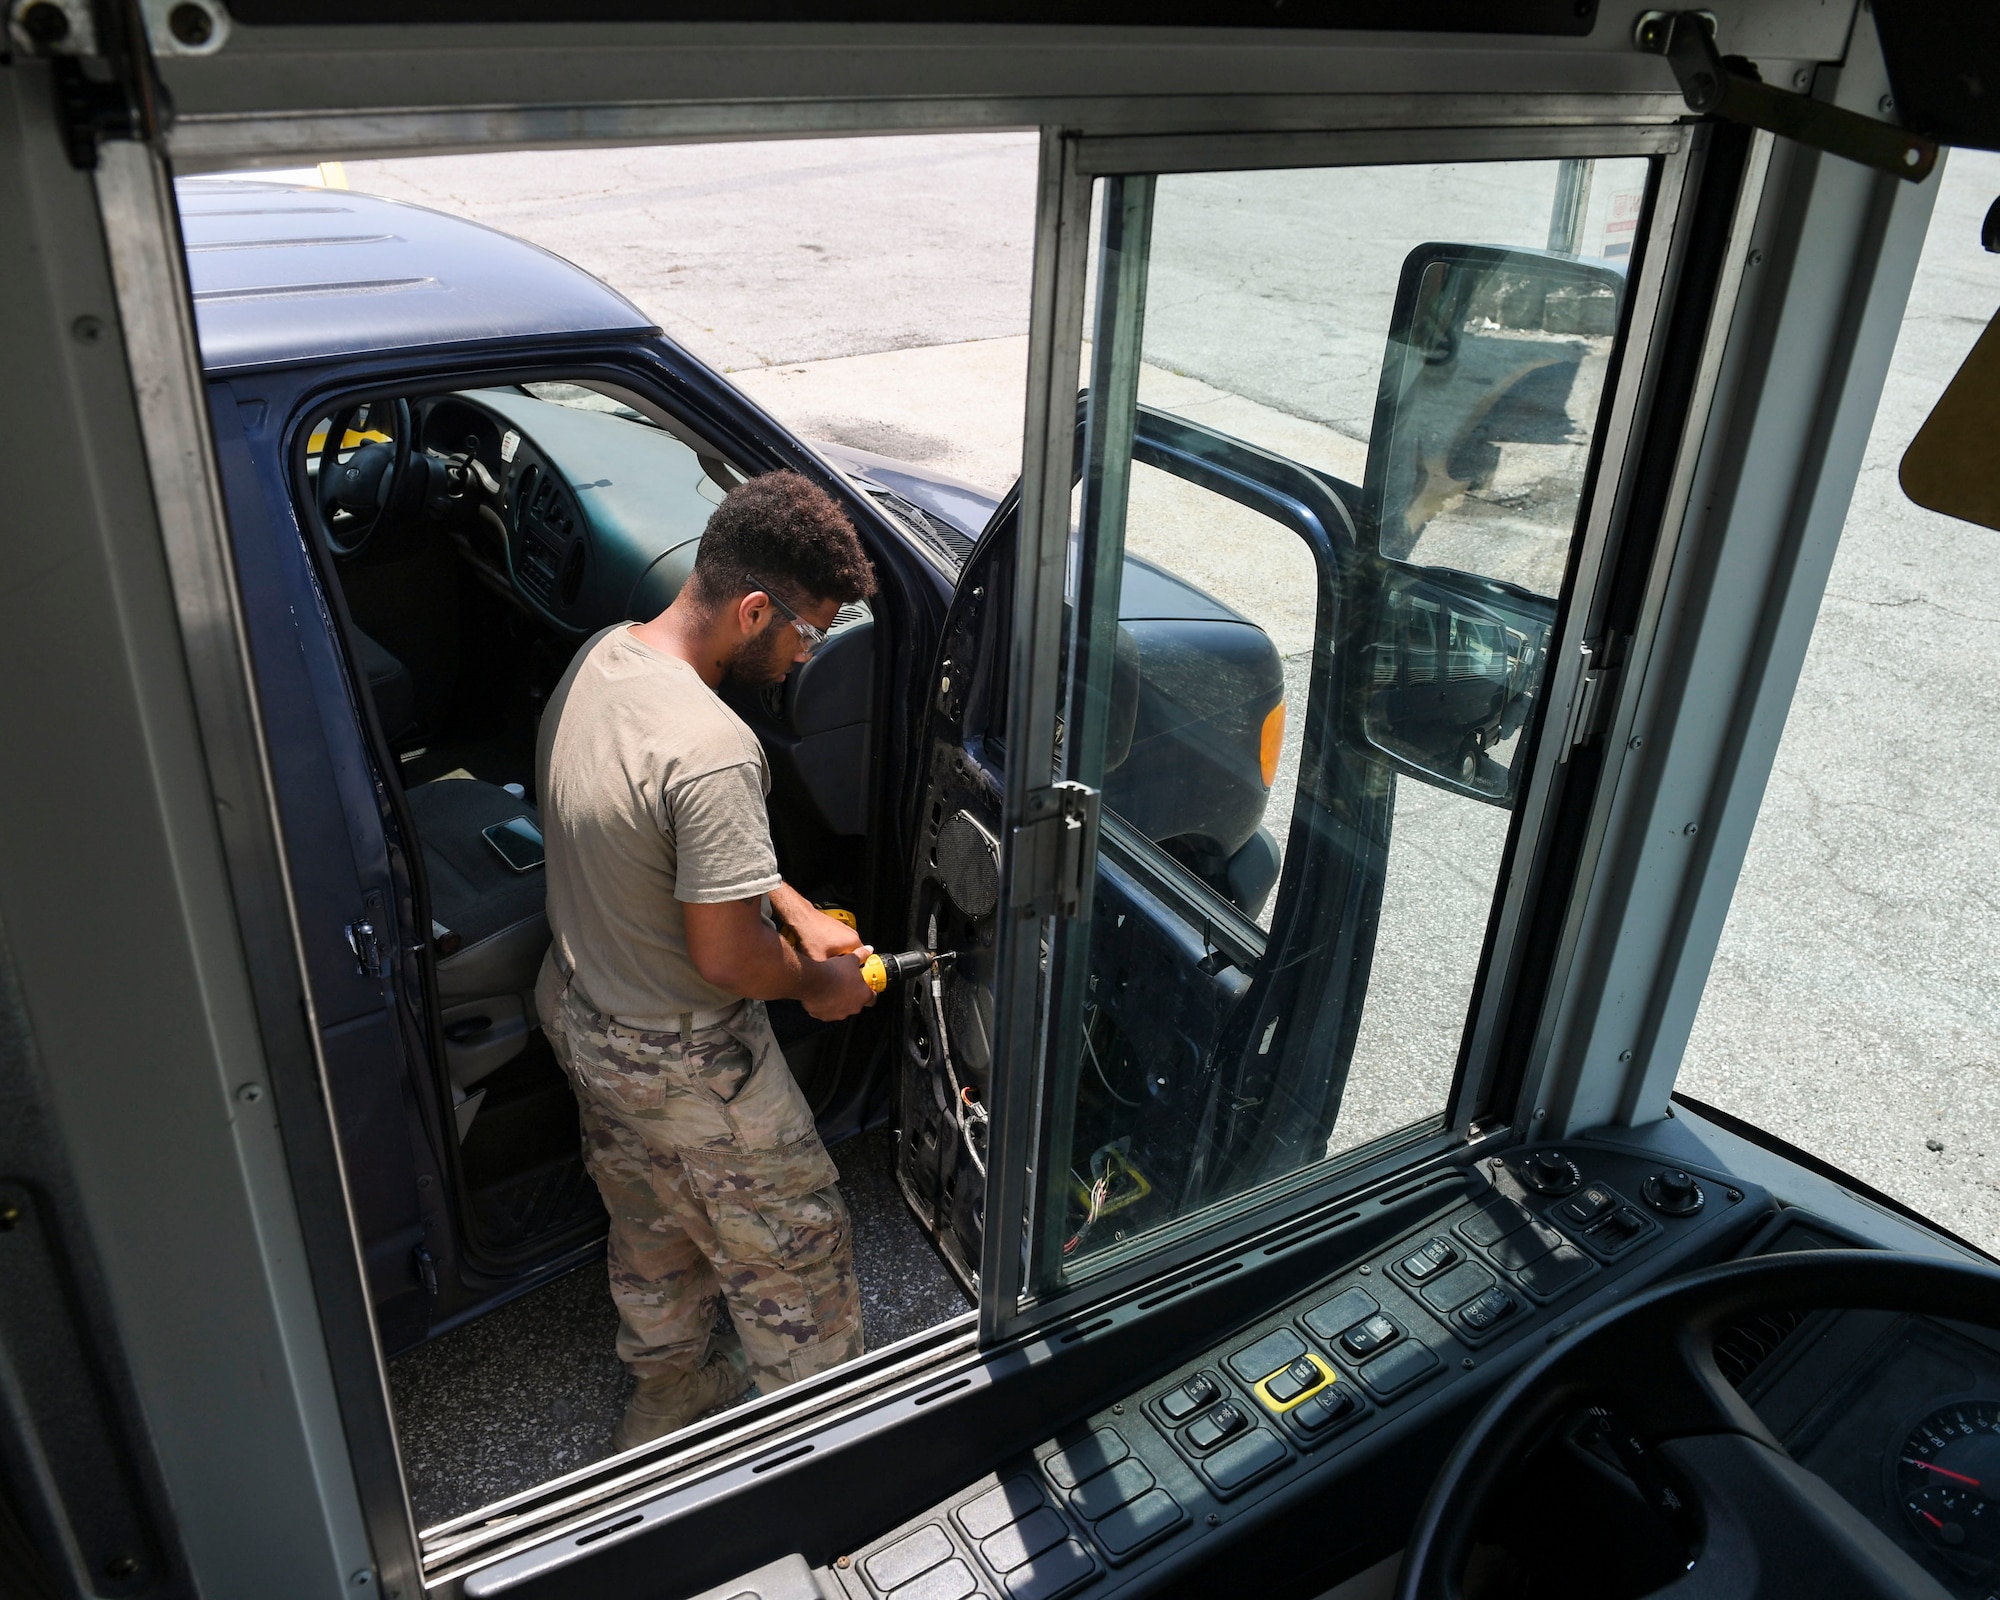 U.S. Air Force Senior Airman Kayne Brown, vehicle mechanic temporarily assigned to the 325th Logistics Readiness Squadron, repairs a broken vehicle June 4, 2019, at Tyndall Air Force Base, Florida.